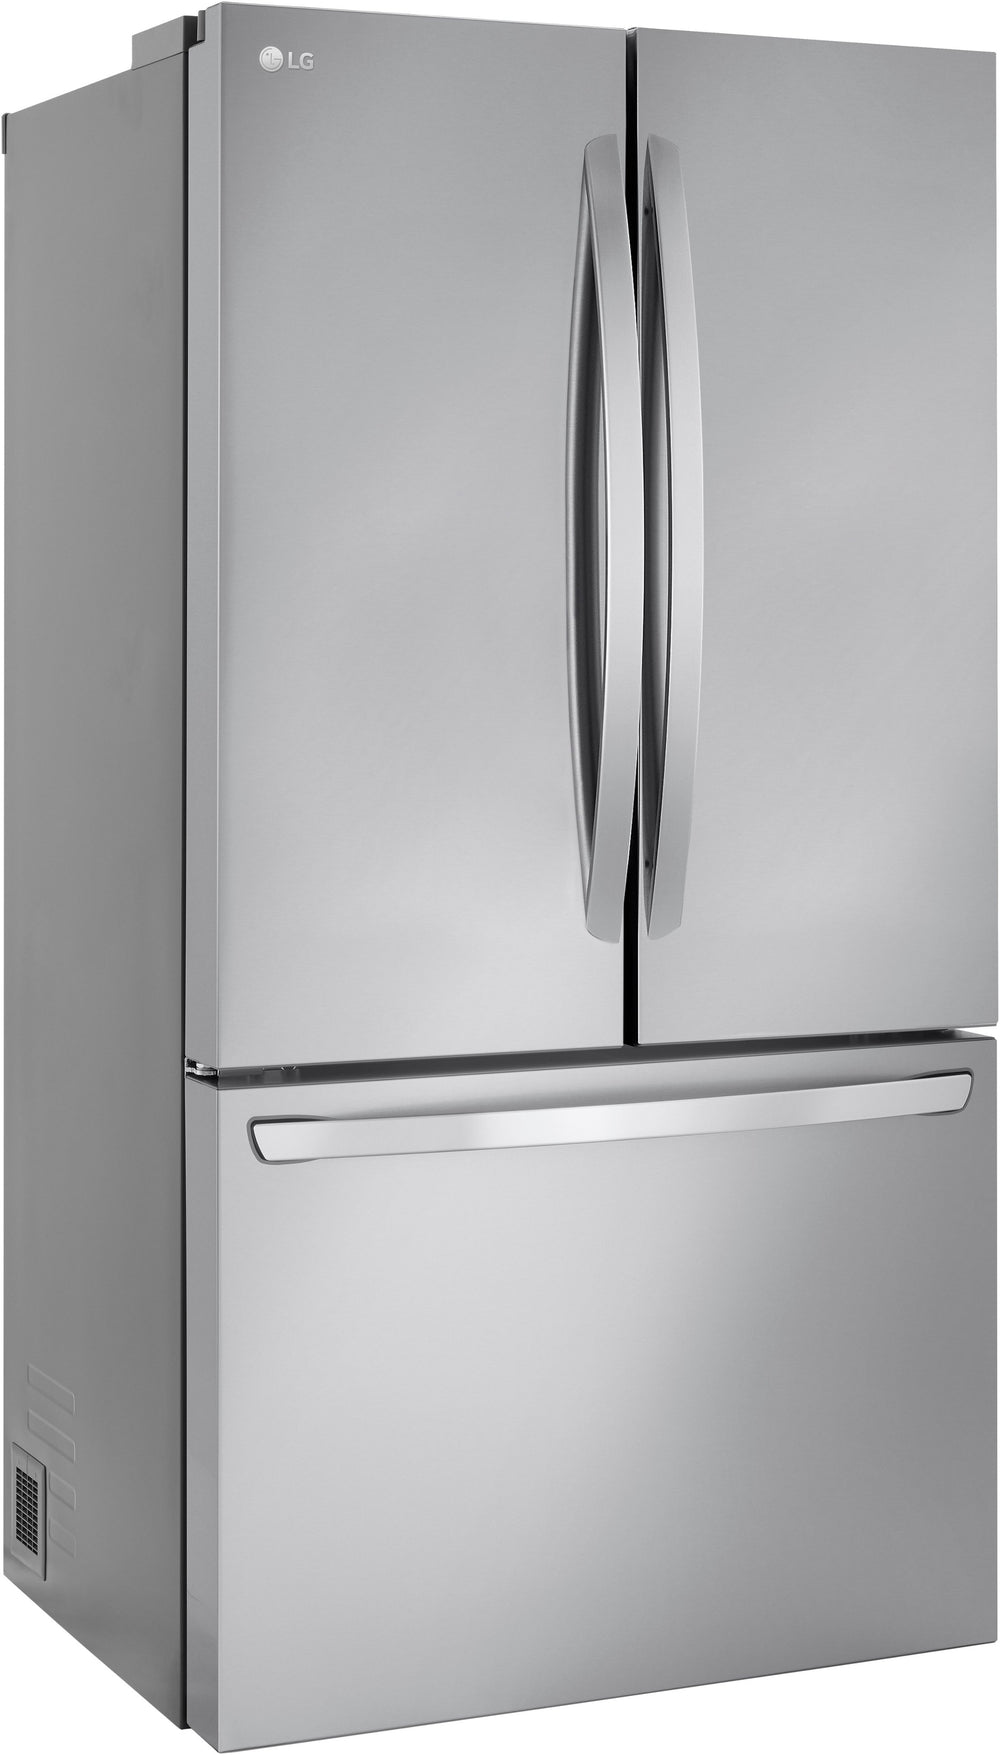 LG - 31.7 Cu. Ft. French Door Smart Refrigerator with Internal Water Dispenser - Stainless Steel_1